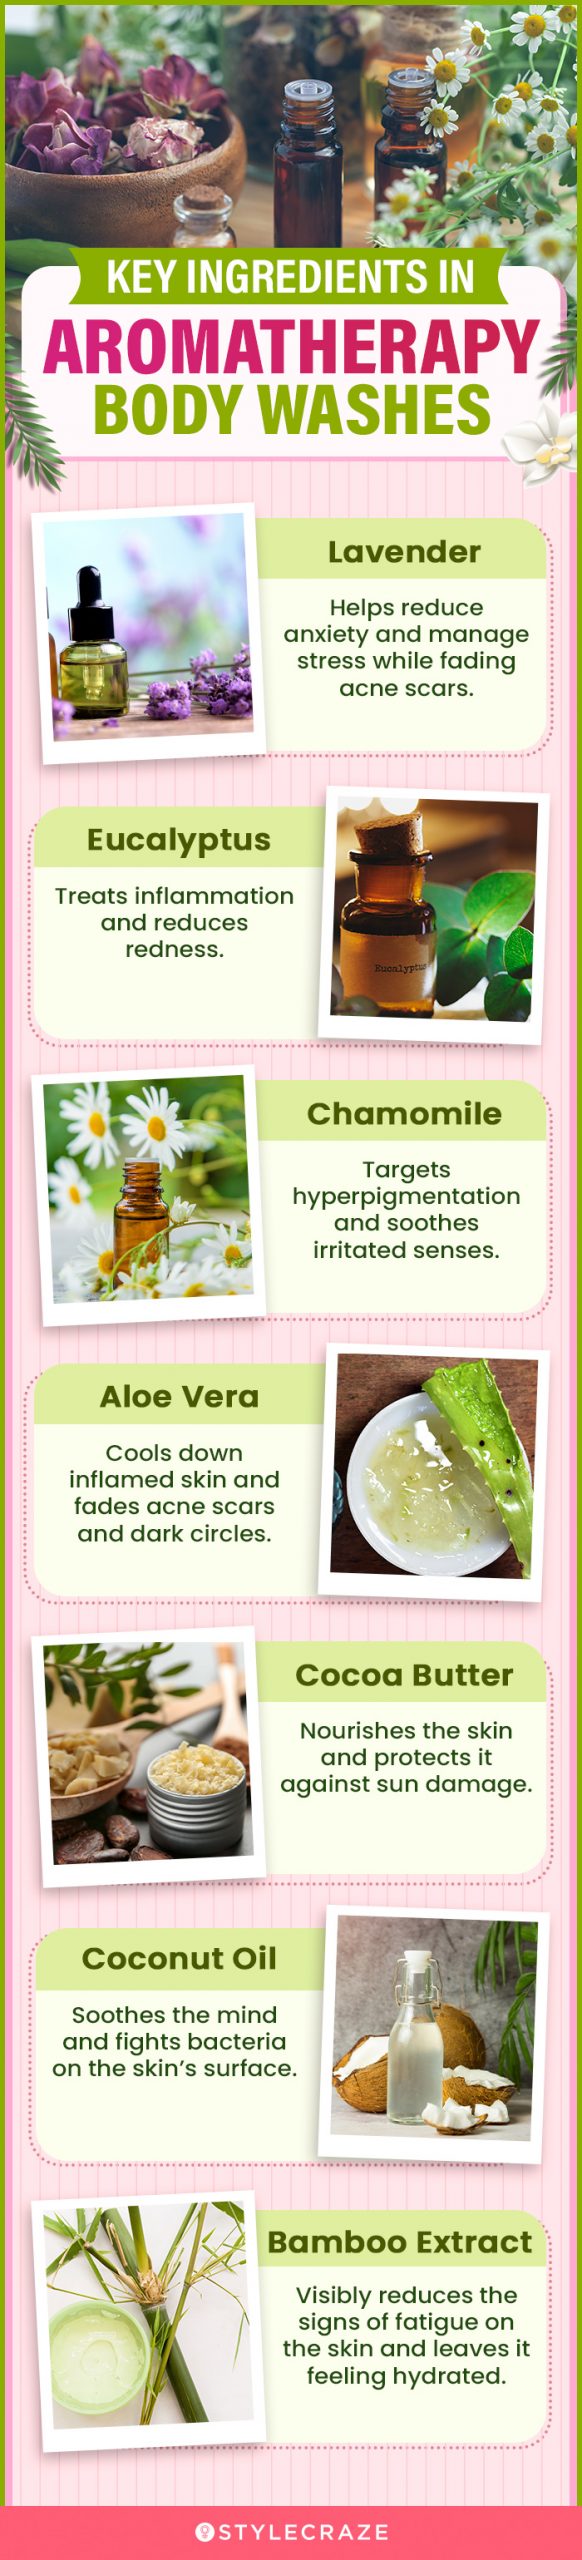  Key Ingredients In Aromatherapy Body Washes (infographic)